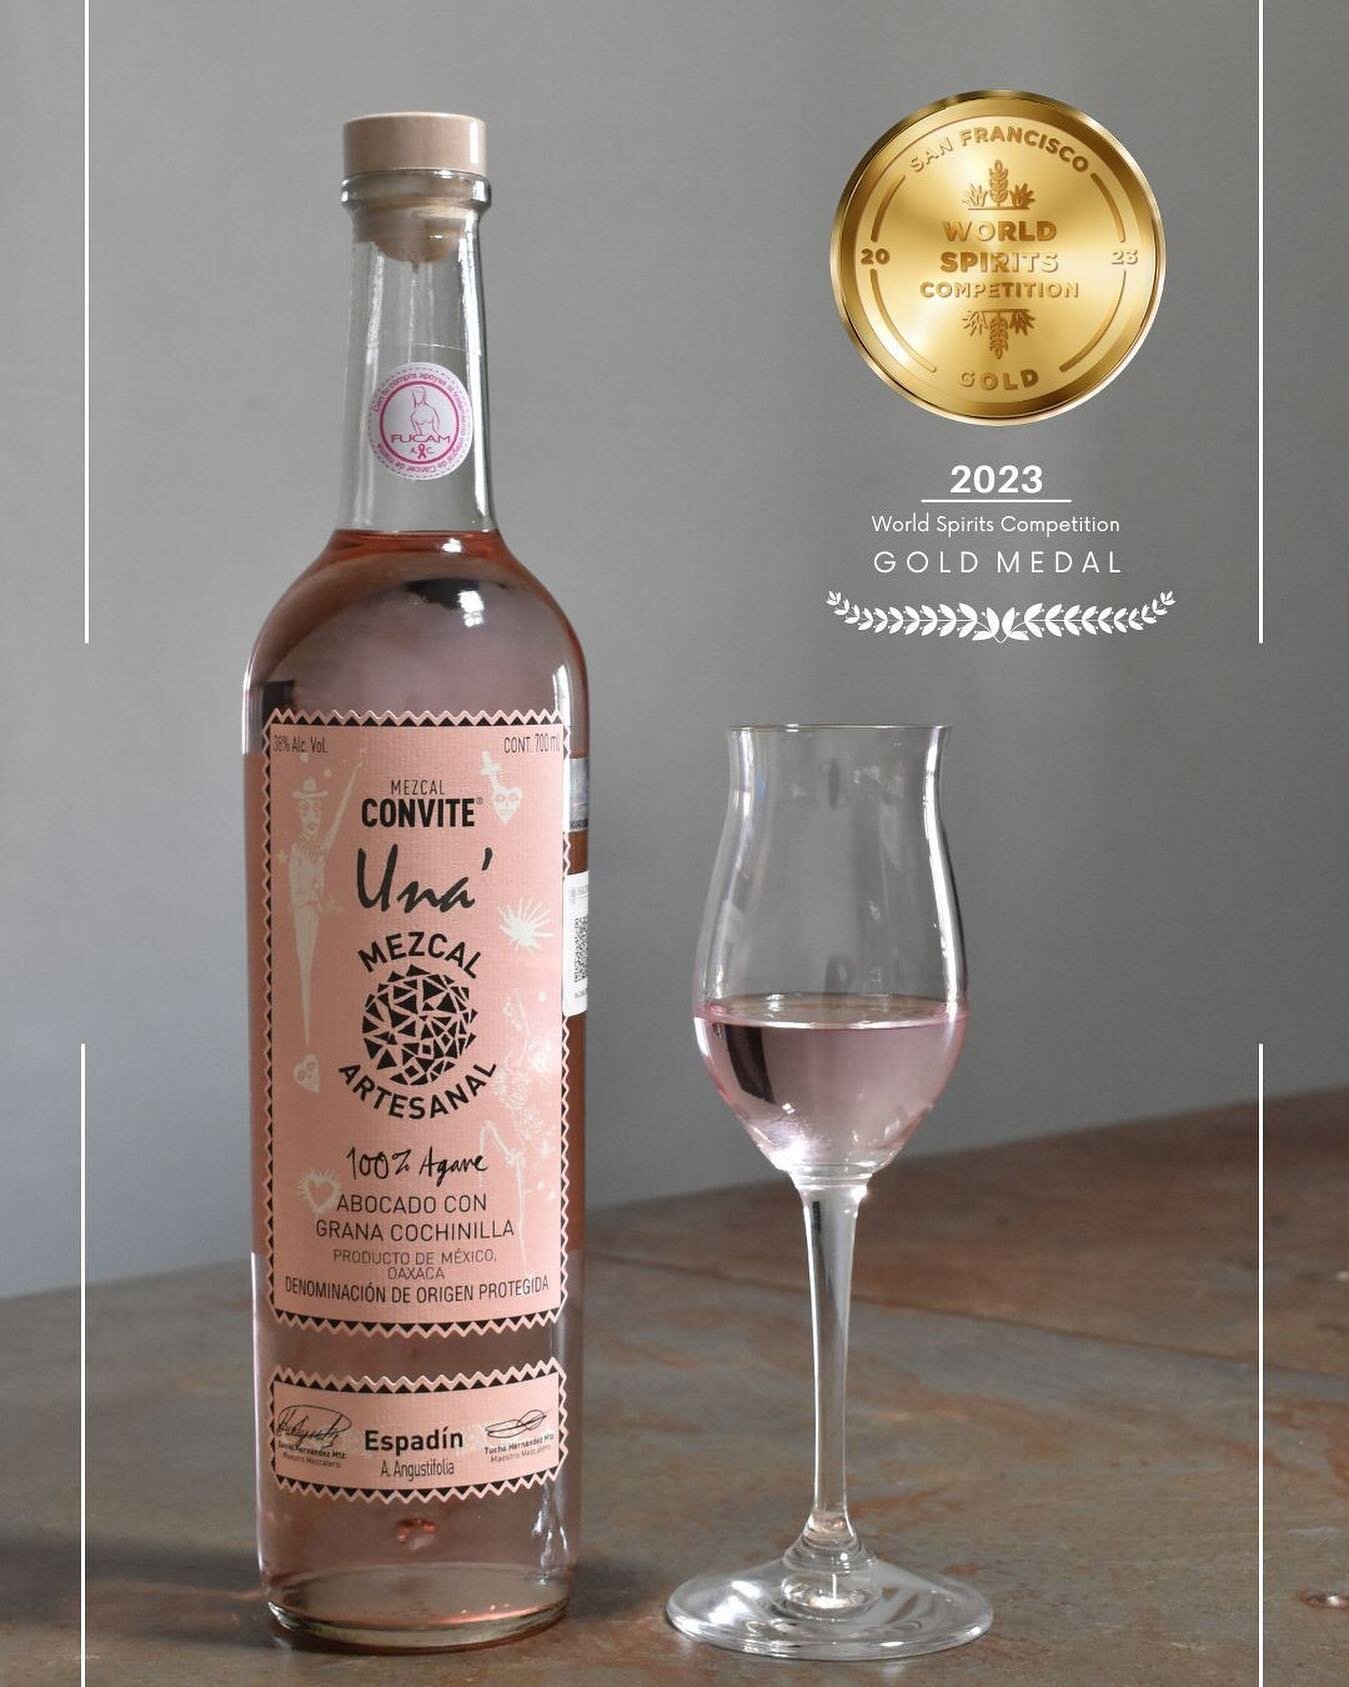 We are thrilled to announce that our &ldquo;Convite Una&rdquo; won the gold medal at @sfwspiritscomp 

💗💗💗

#santosforero  #embracethetradition #mezcal #agave #sfwsc #gold #medal #rose #pink #kosher #organic #bartender #bar #montreal #quebec #cana